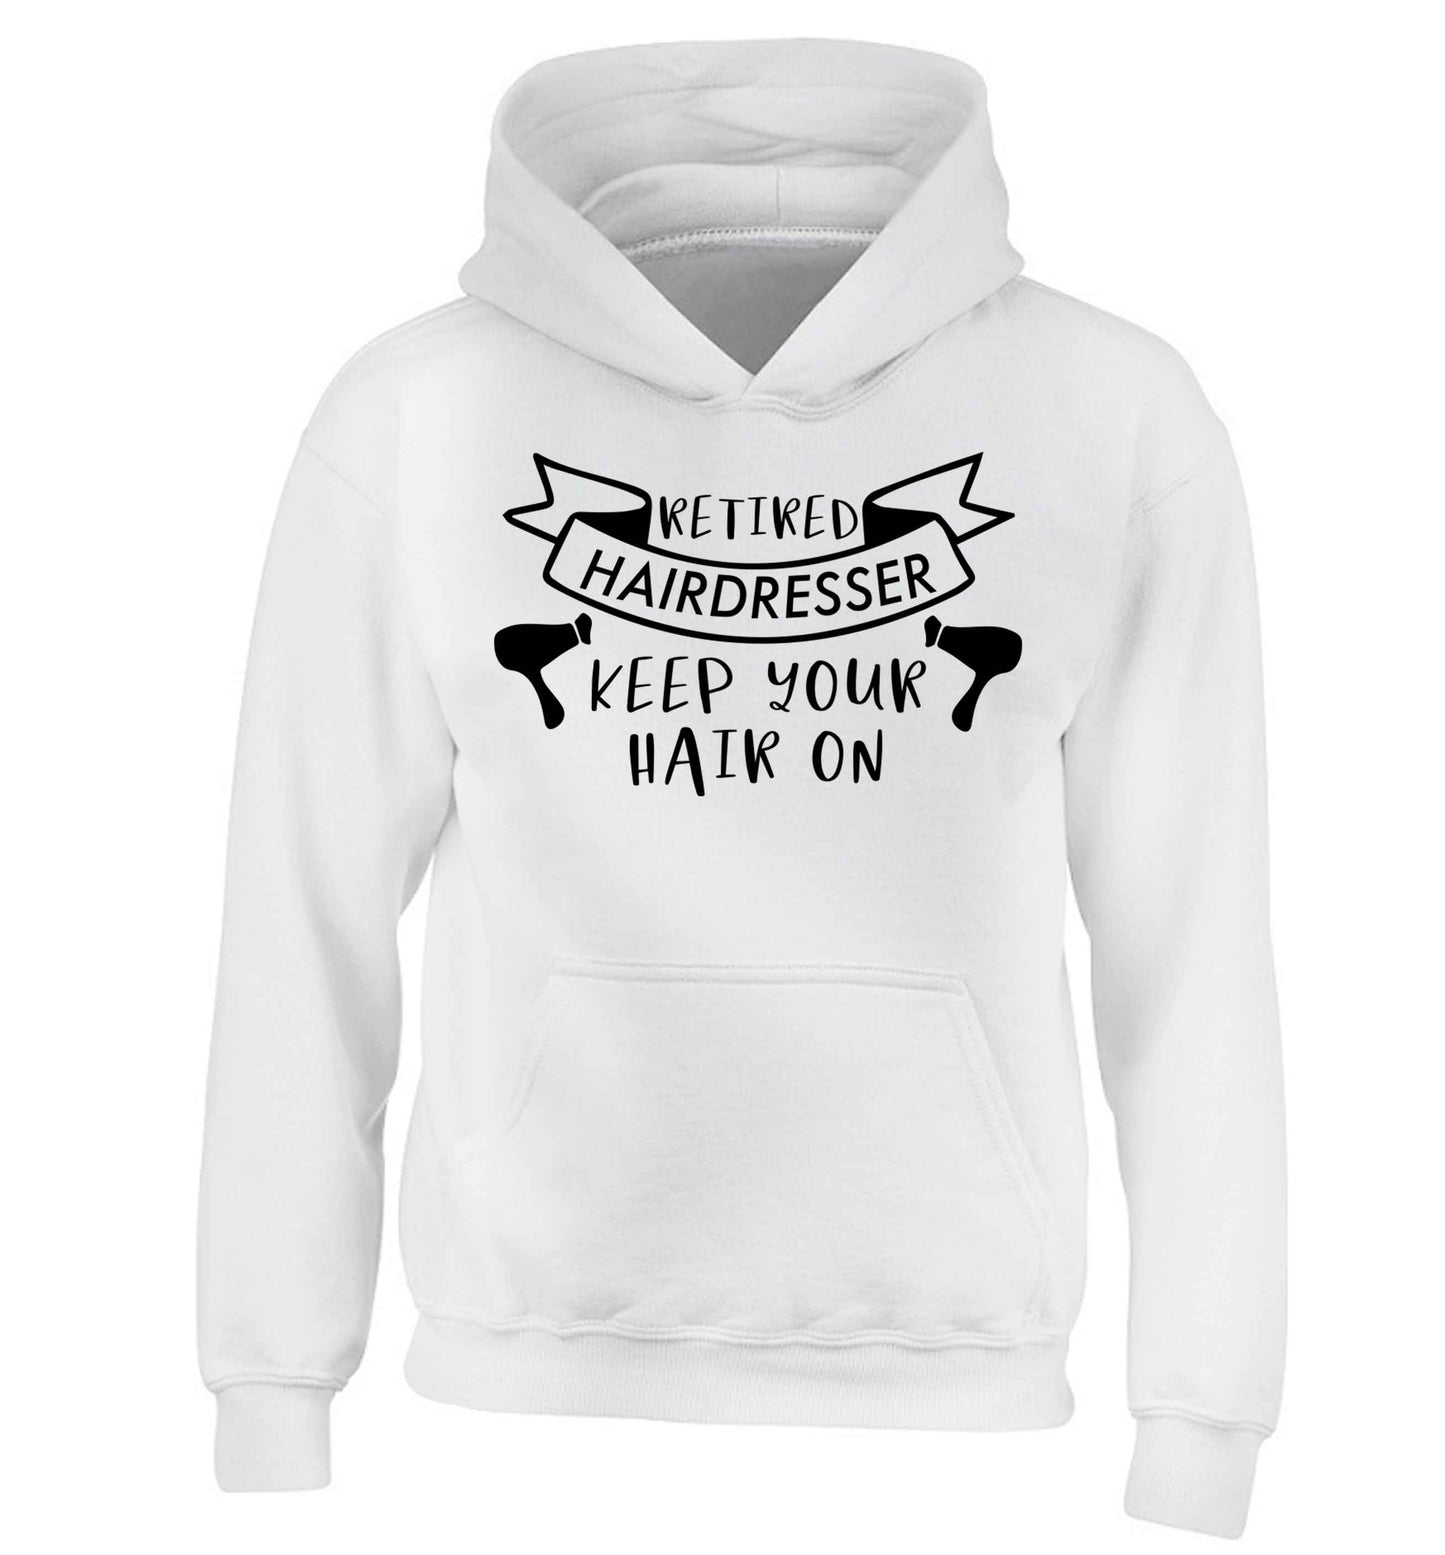 Retired hairdresser keep your hair on children's white hoodie 12-13 Years